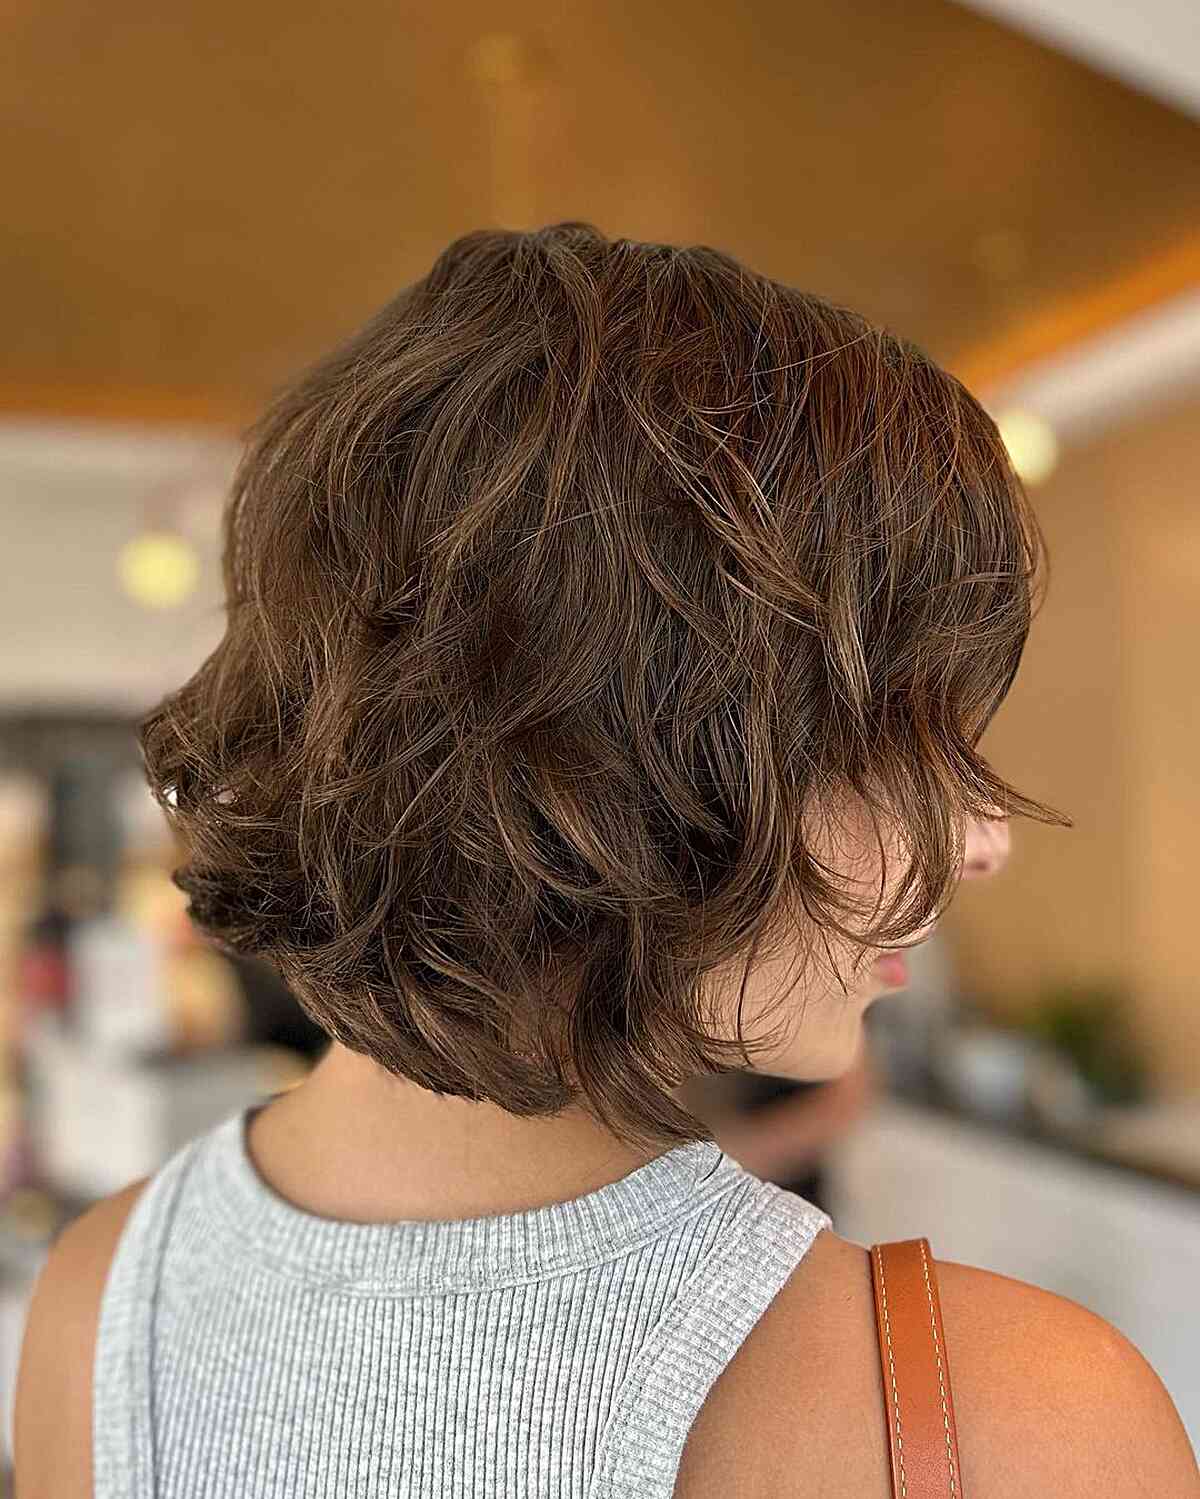 Neck-Length Brown Bobbed Hair with Textured Shaggy Layers